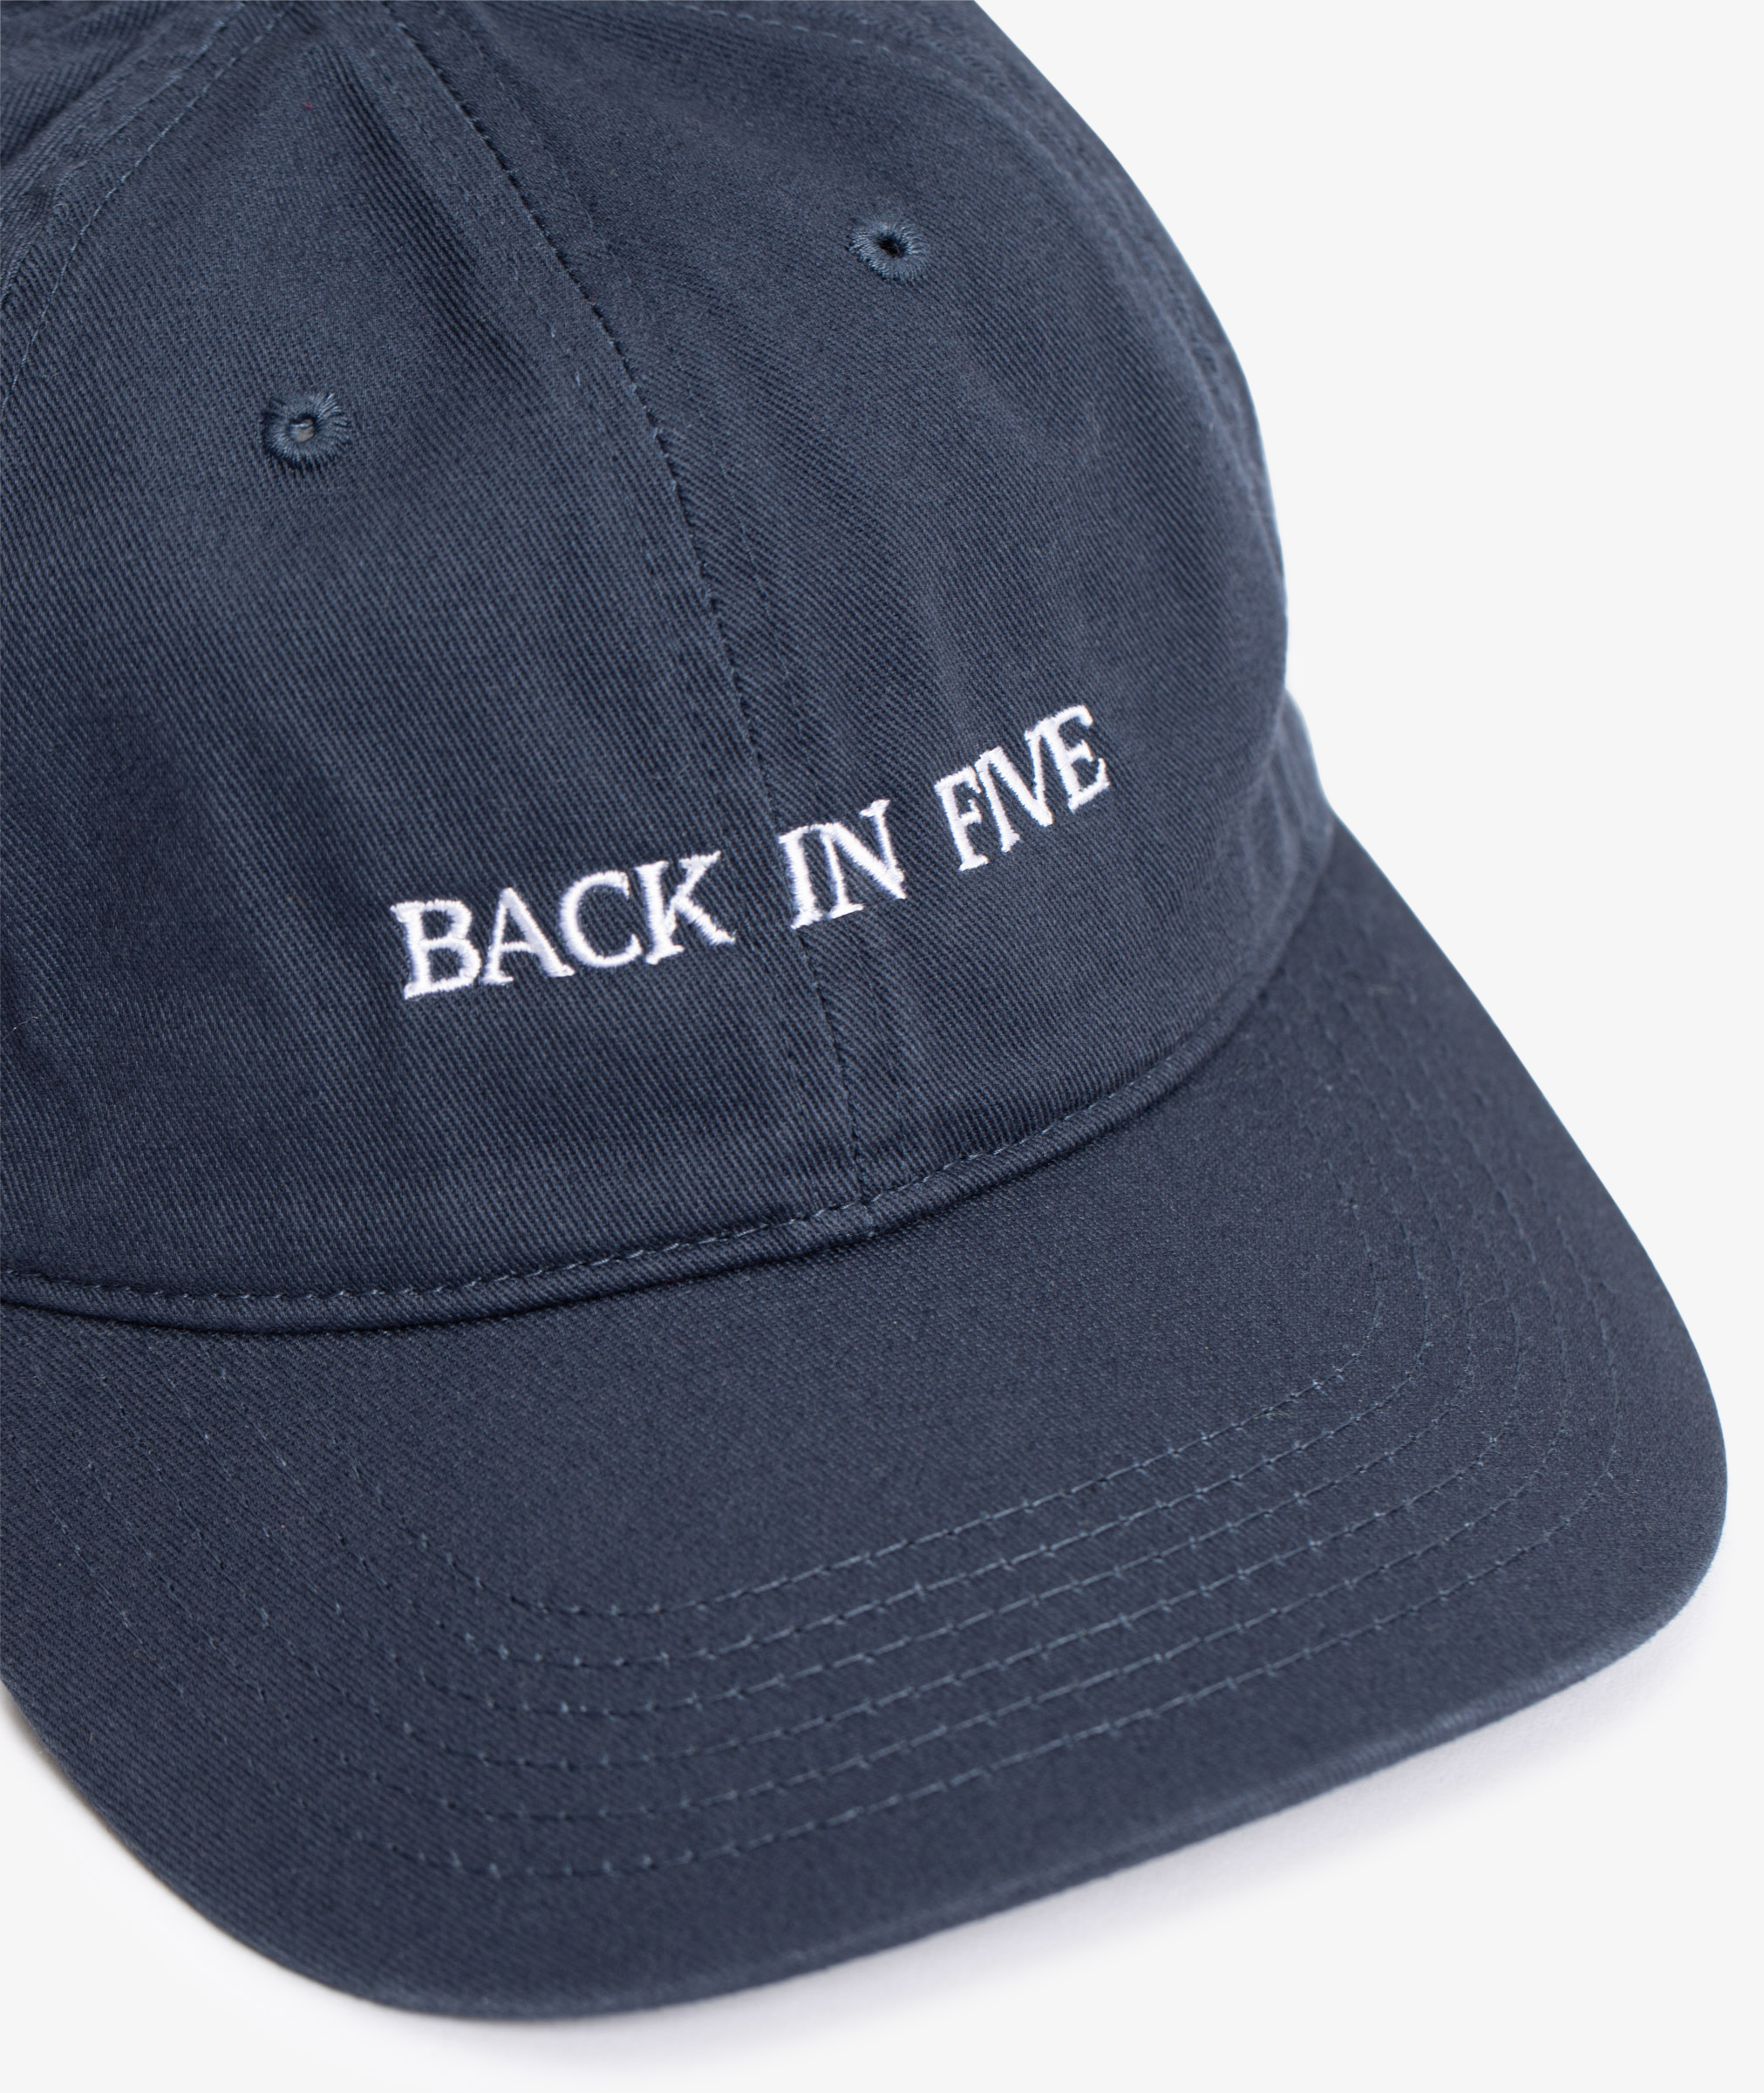 Norse Store | Shipping Worldwide - IDEA Back In Five Cap - Navy